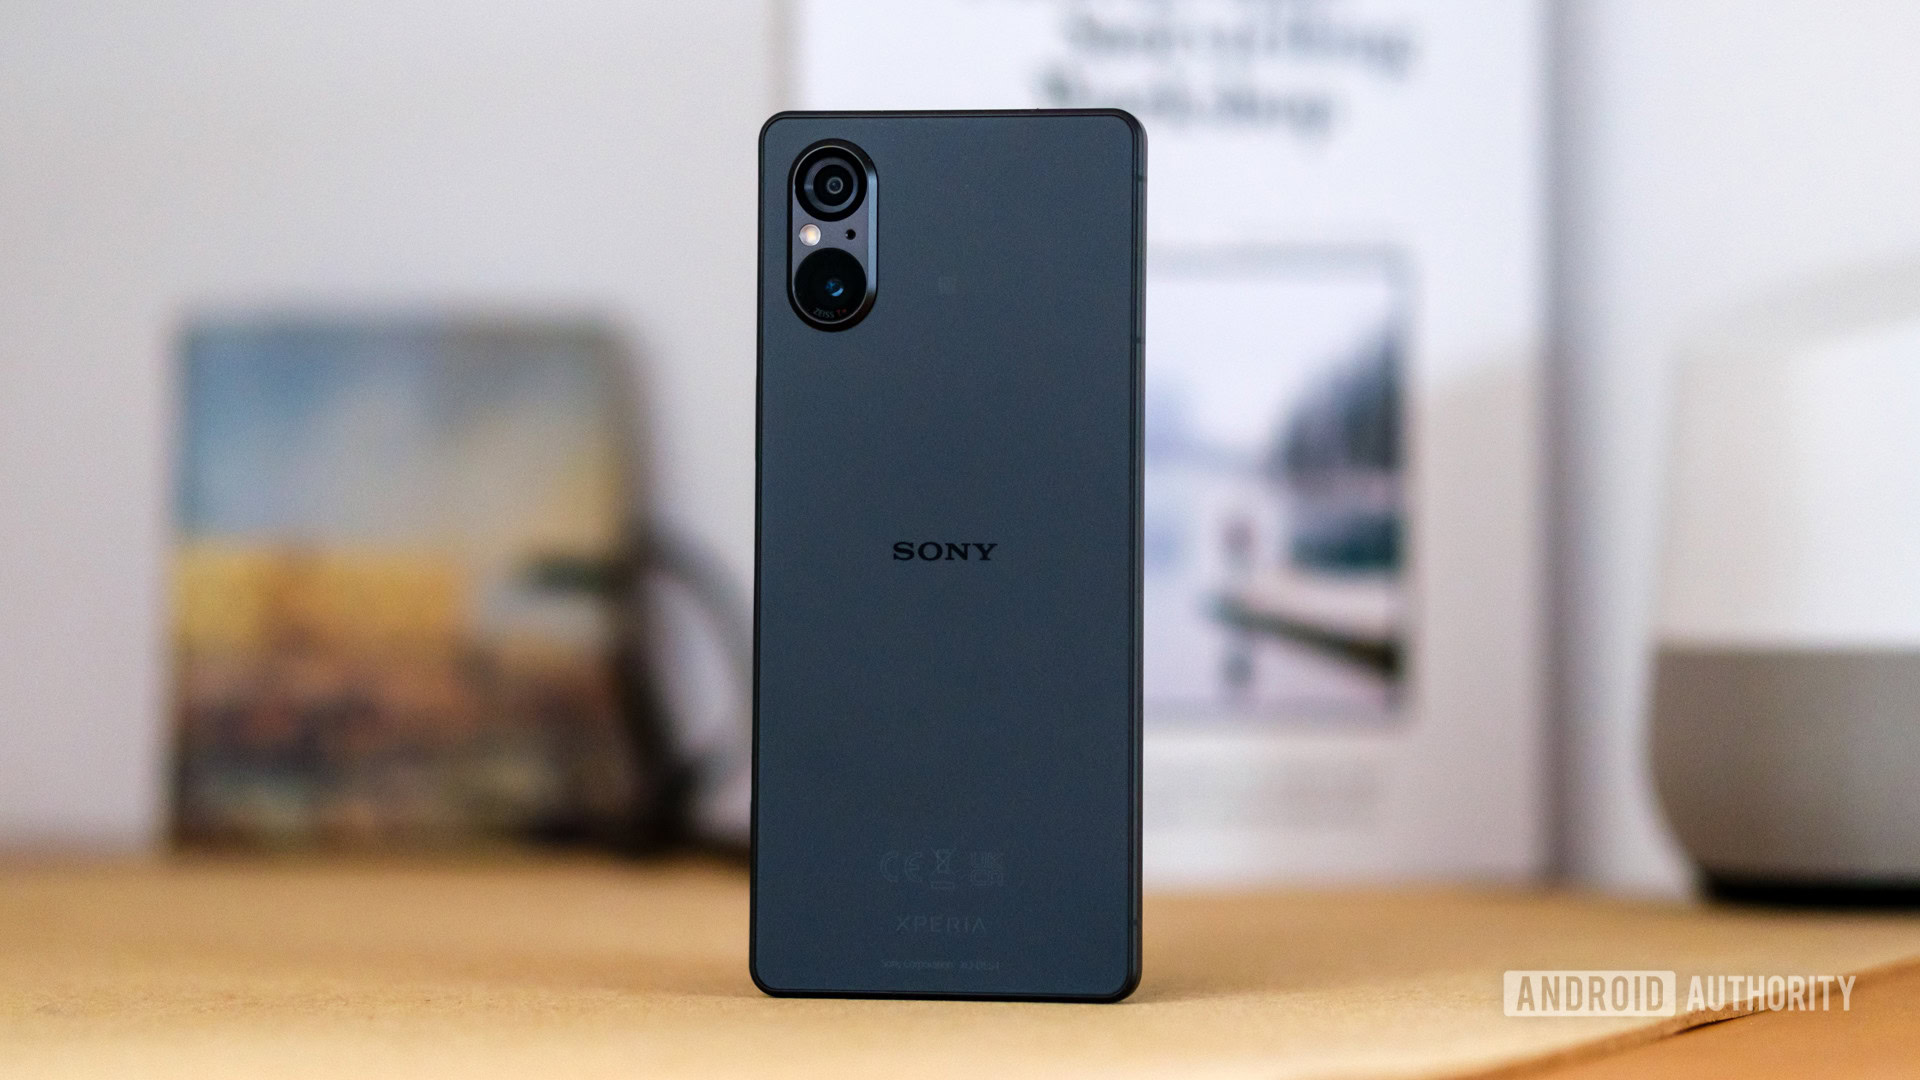 Sony Xperia 5 V: Release date, price, specs, and more - Android Authority